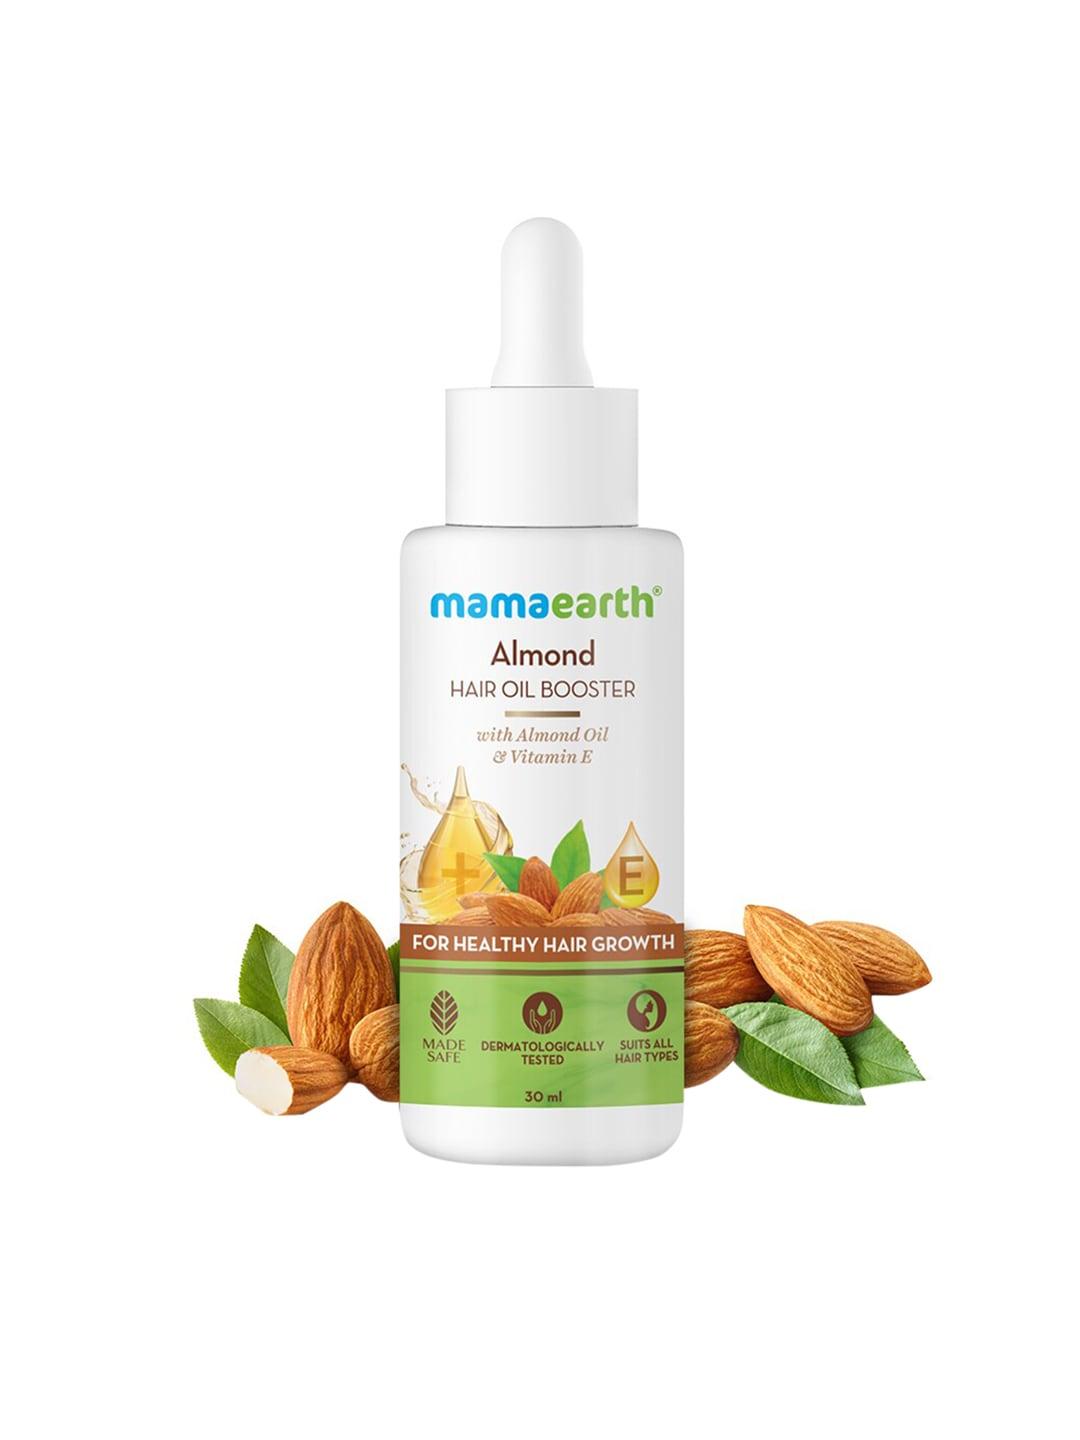 mamaearth-almond-hair-oil-booster-with-almond-oil-&-vitamin-e-&-for-healthy-hair-growth---30-ml